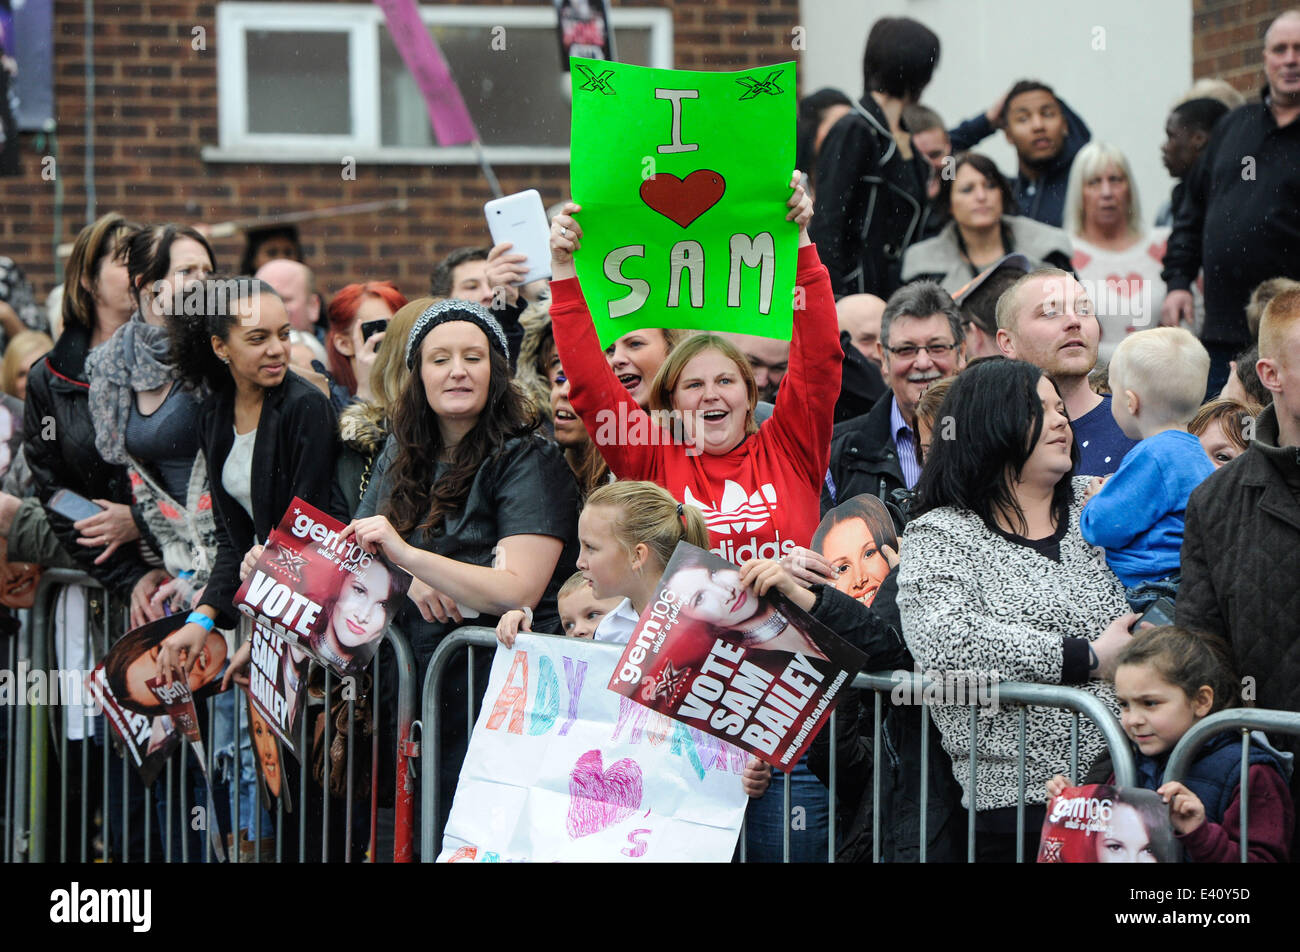 X Factor finalist Sam Bailey arrives at the Eyres Monsell Club & Institute in Leicester to perform and meet mentor Sharon Osbourne ahead of the X Factor Final  Featuring: Atmosphere,Fans Where: Leicester, United Kingdom When: 12 Dec 2013 Stock Photo